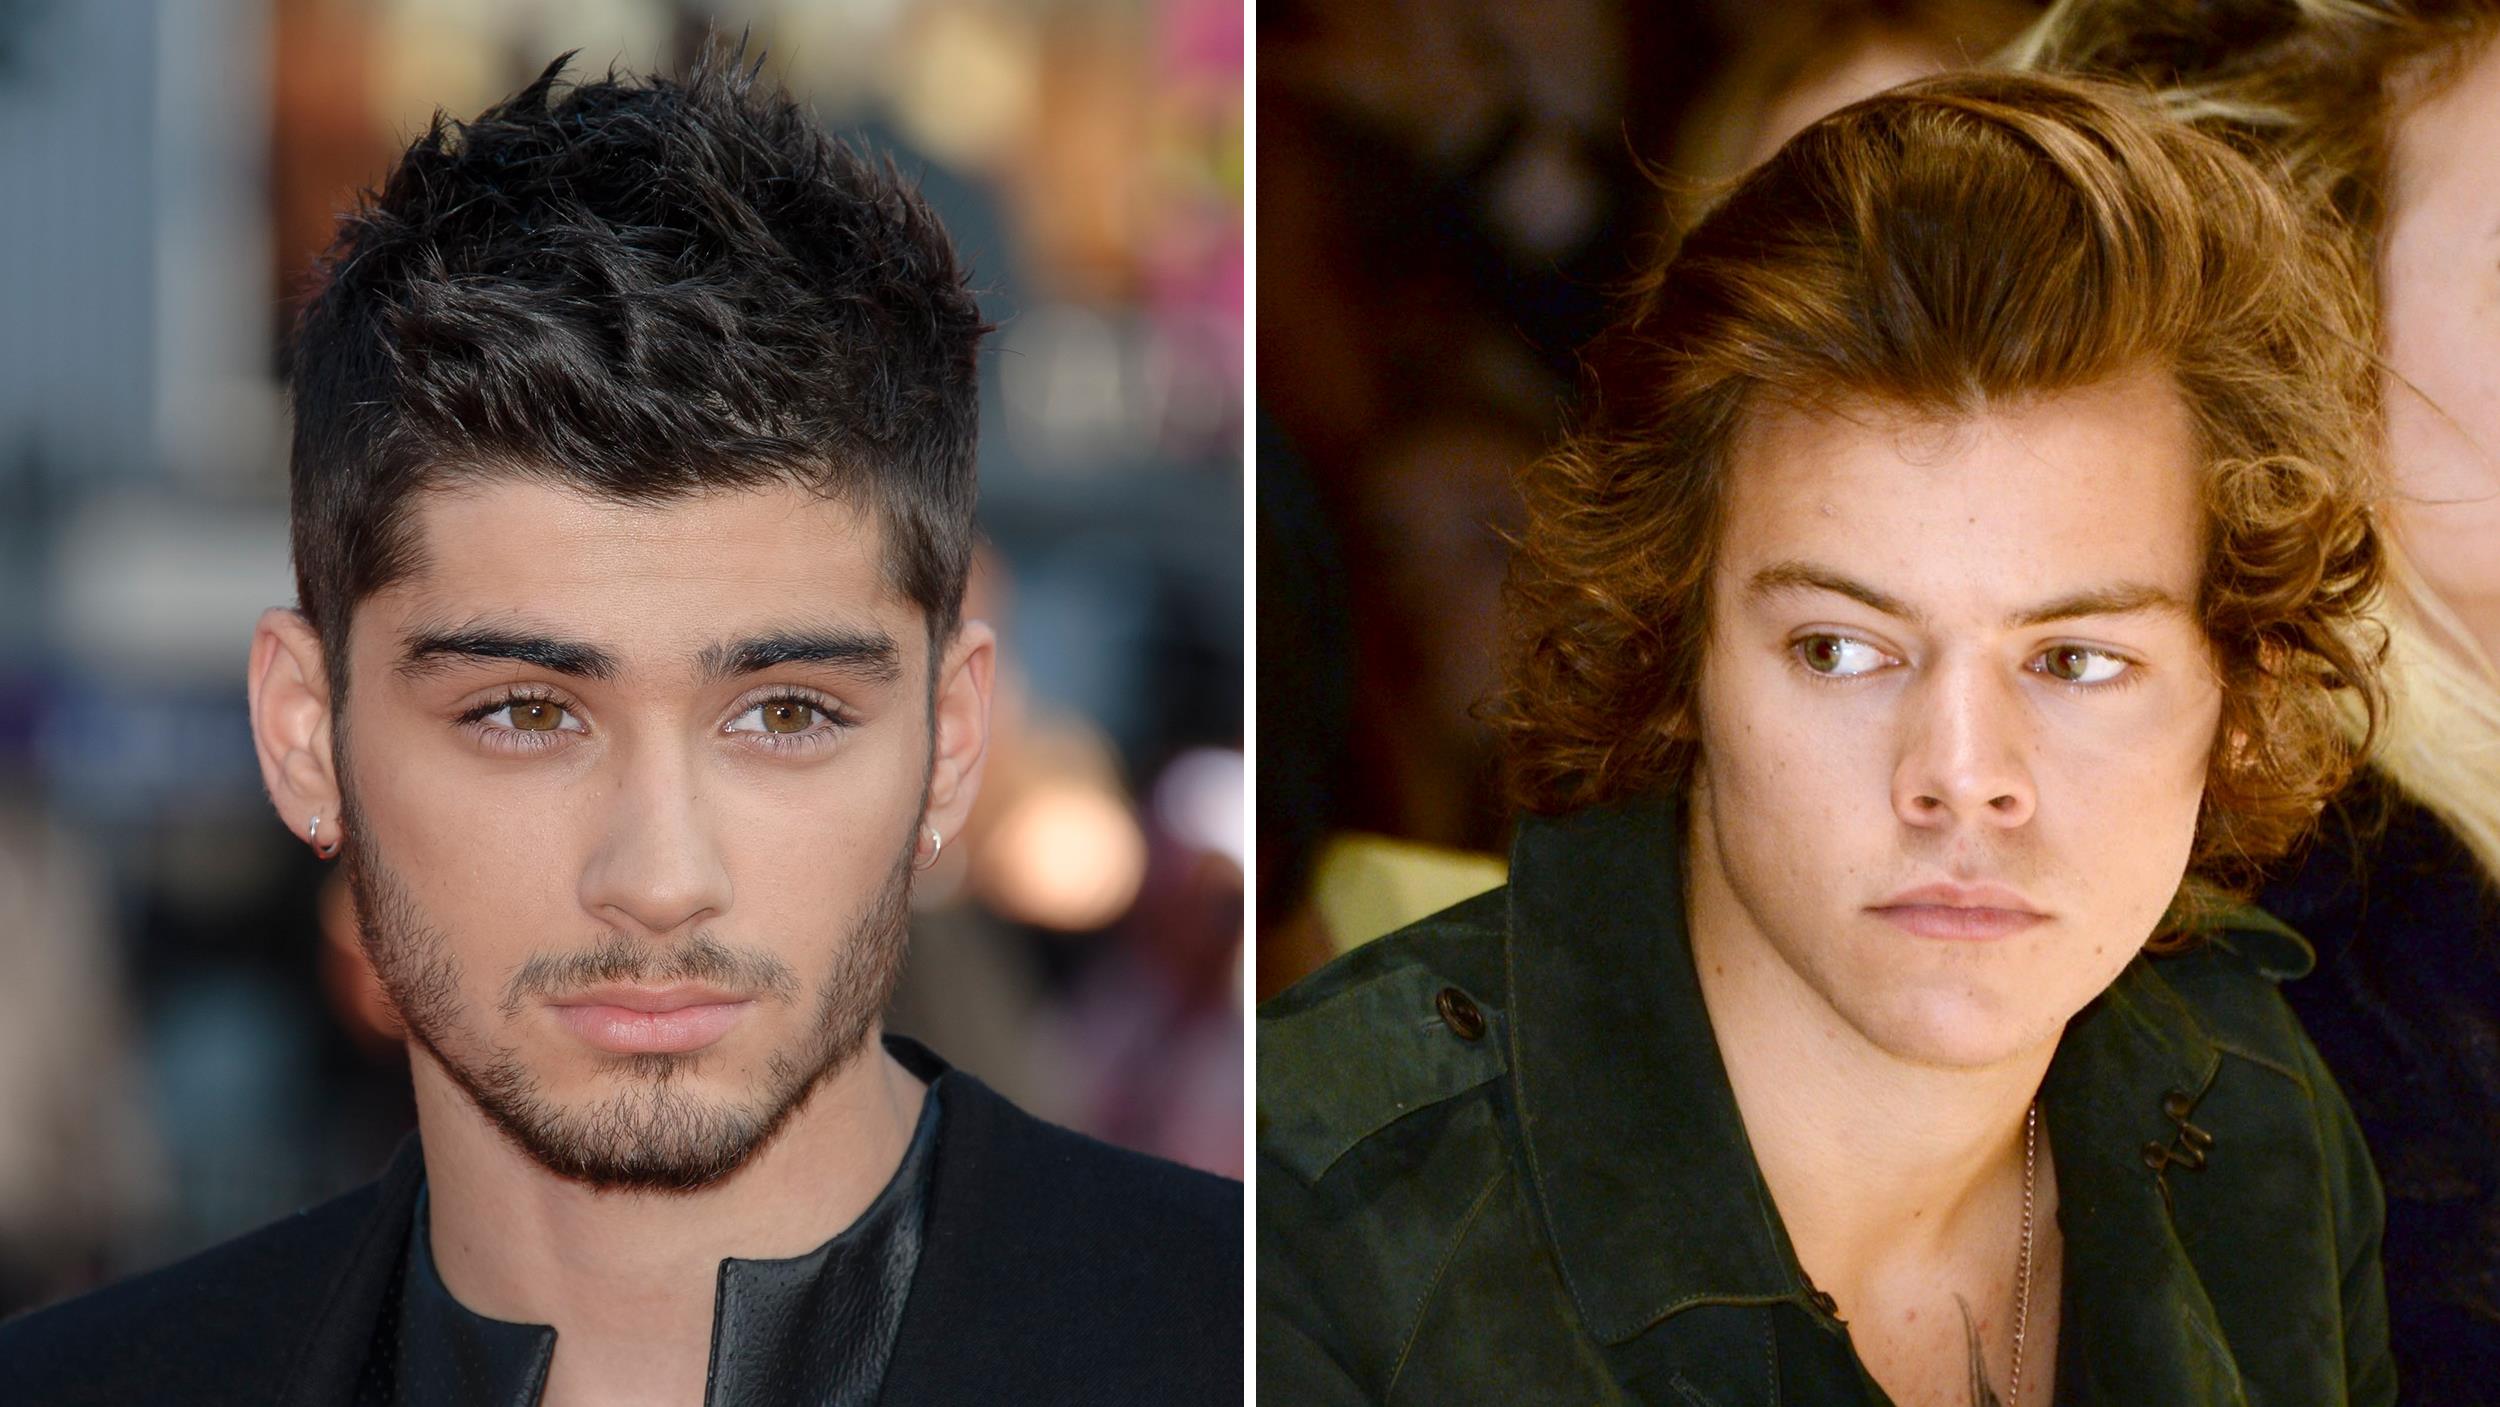 Zayn Maliks One Direction departure leaves Harry Styles crying 1D